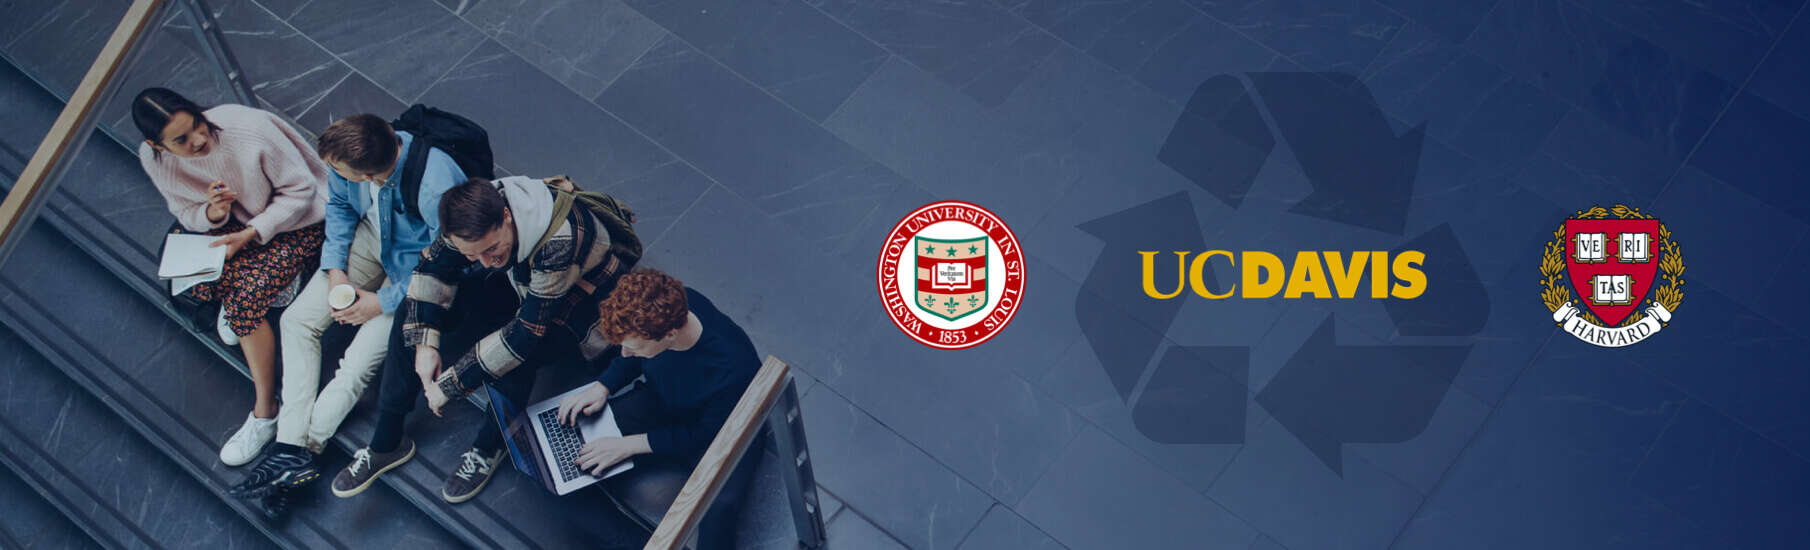 washington-university-of-st-louis-logo-next-to-uc-davis-logo-"recycle"-symbol-which-is-then-next-to-harvard-logo.-these-logos-are-over-a-photo-of-four-students-sitting-on-the-strong-steps-of-a-building-doing-homework-and-talking.